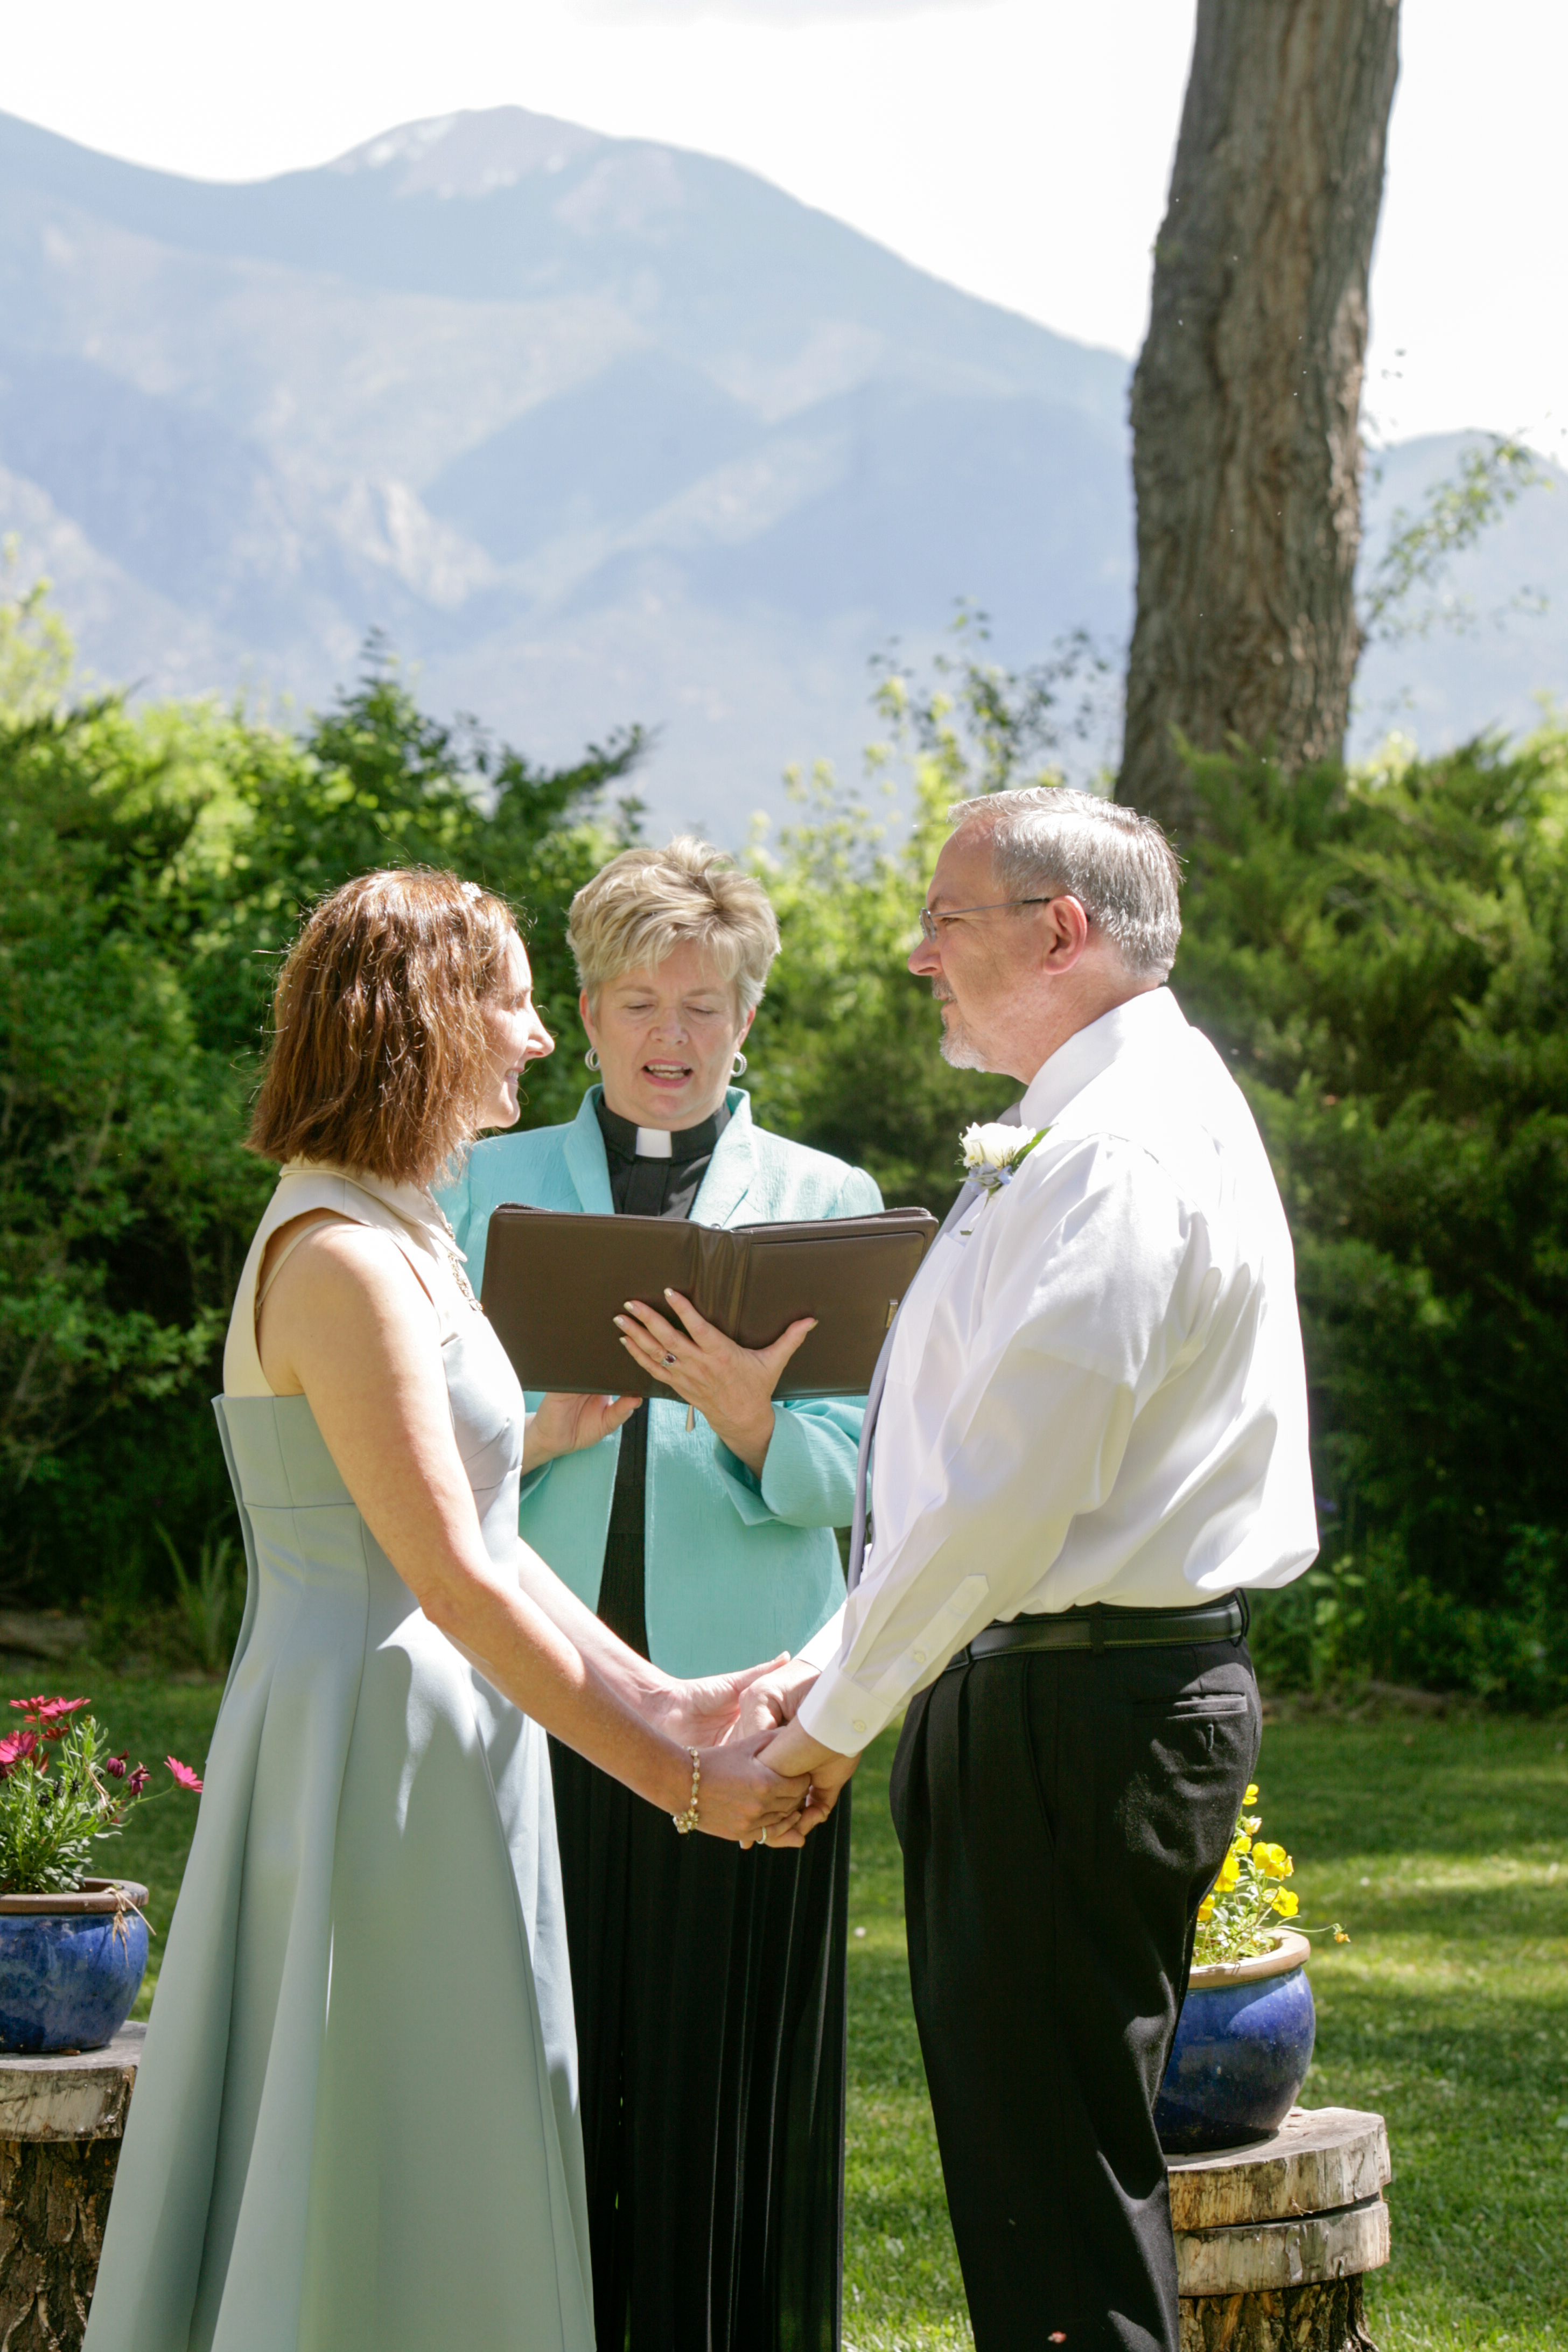 Vow Renewal Ceremony in Taos, NM